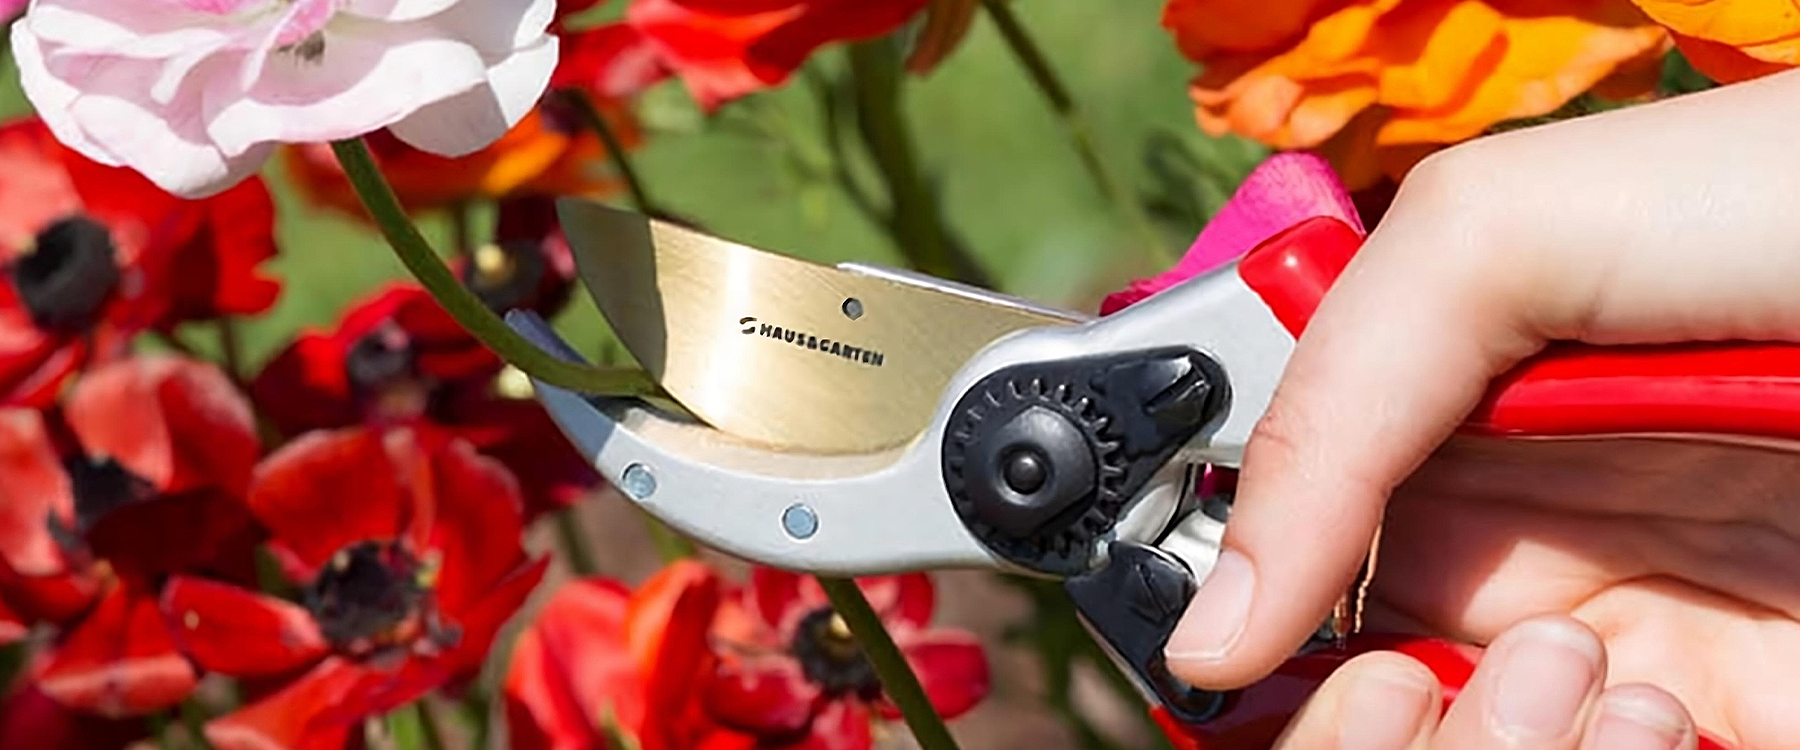 Factors to Consider When Choosing the Best Pruning Shears